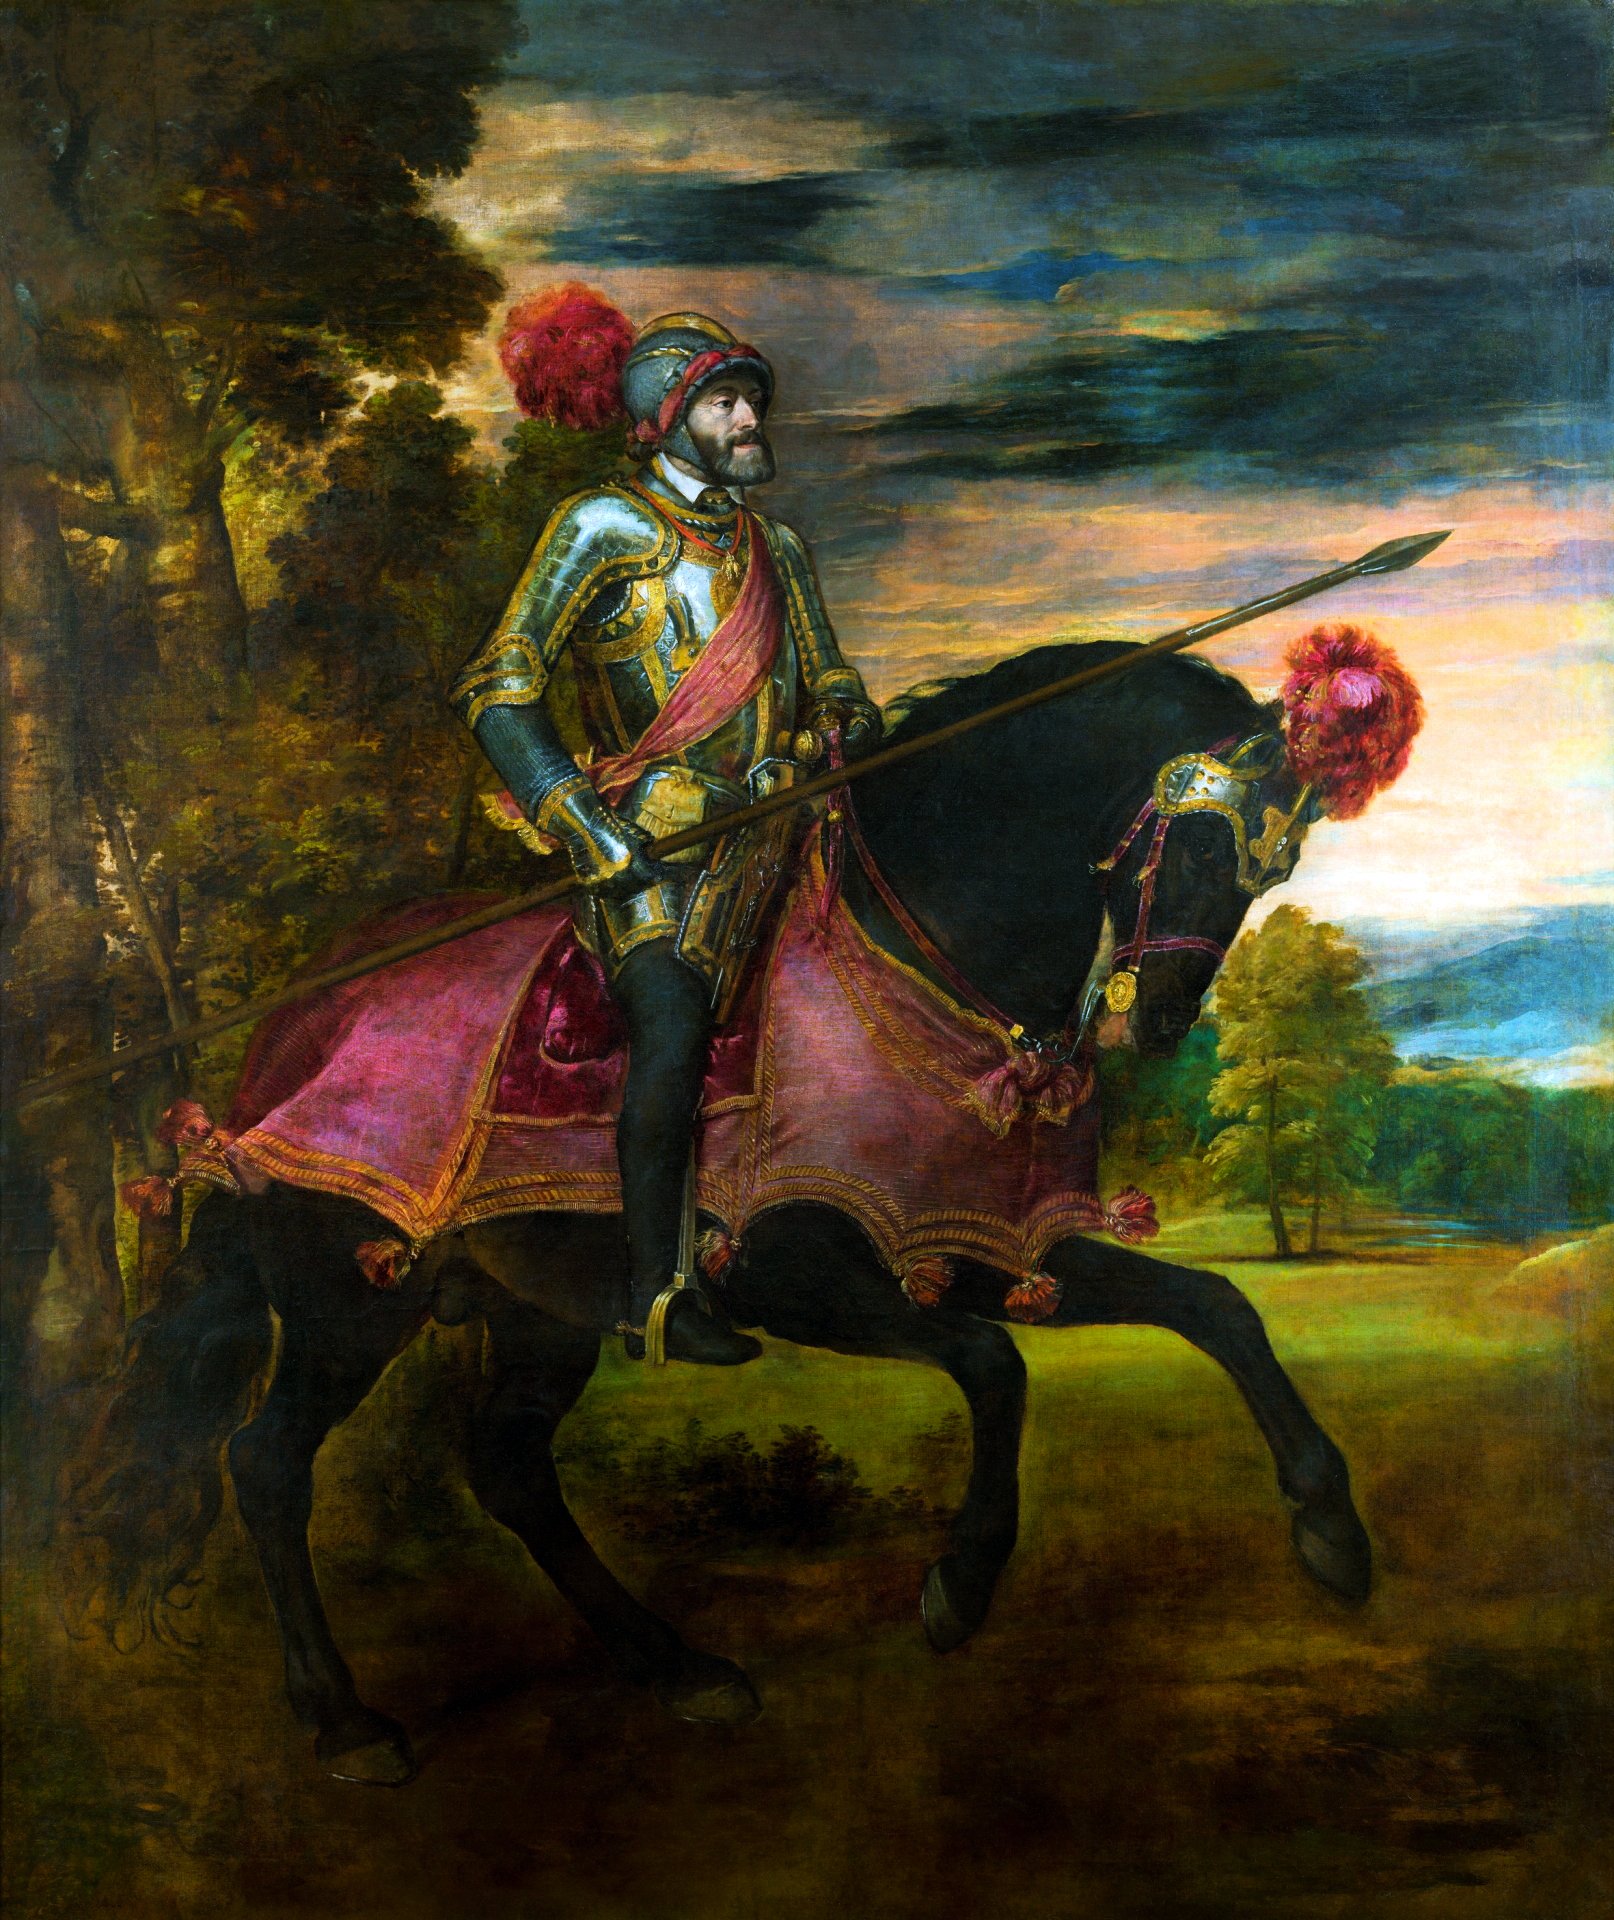 A detailed portrait of Charles V of Habsburg, depicted as a knight in shining silver armor with intricate gold details. He is mounted on a powerful black horse adorned with a rich pinkish-red fabric featuring gold trims and large matching plumes. Charles, with a determined expression, wears a helmet topped with a red plume and holds a long lance in one hand. The background captures a moody, atmospheric landscape with tall trees, a cloudy sky, and hints of a setting sun.